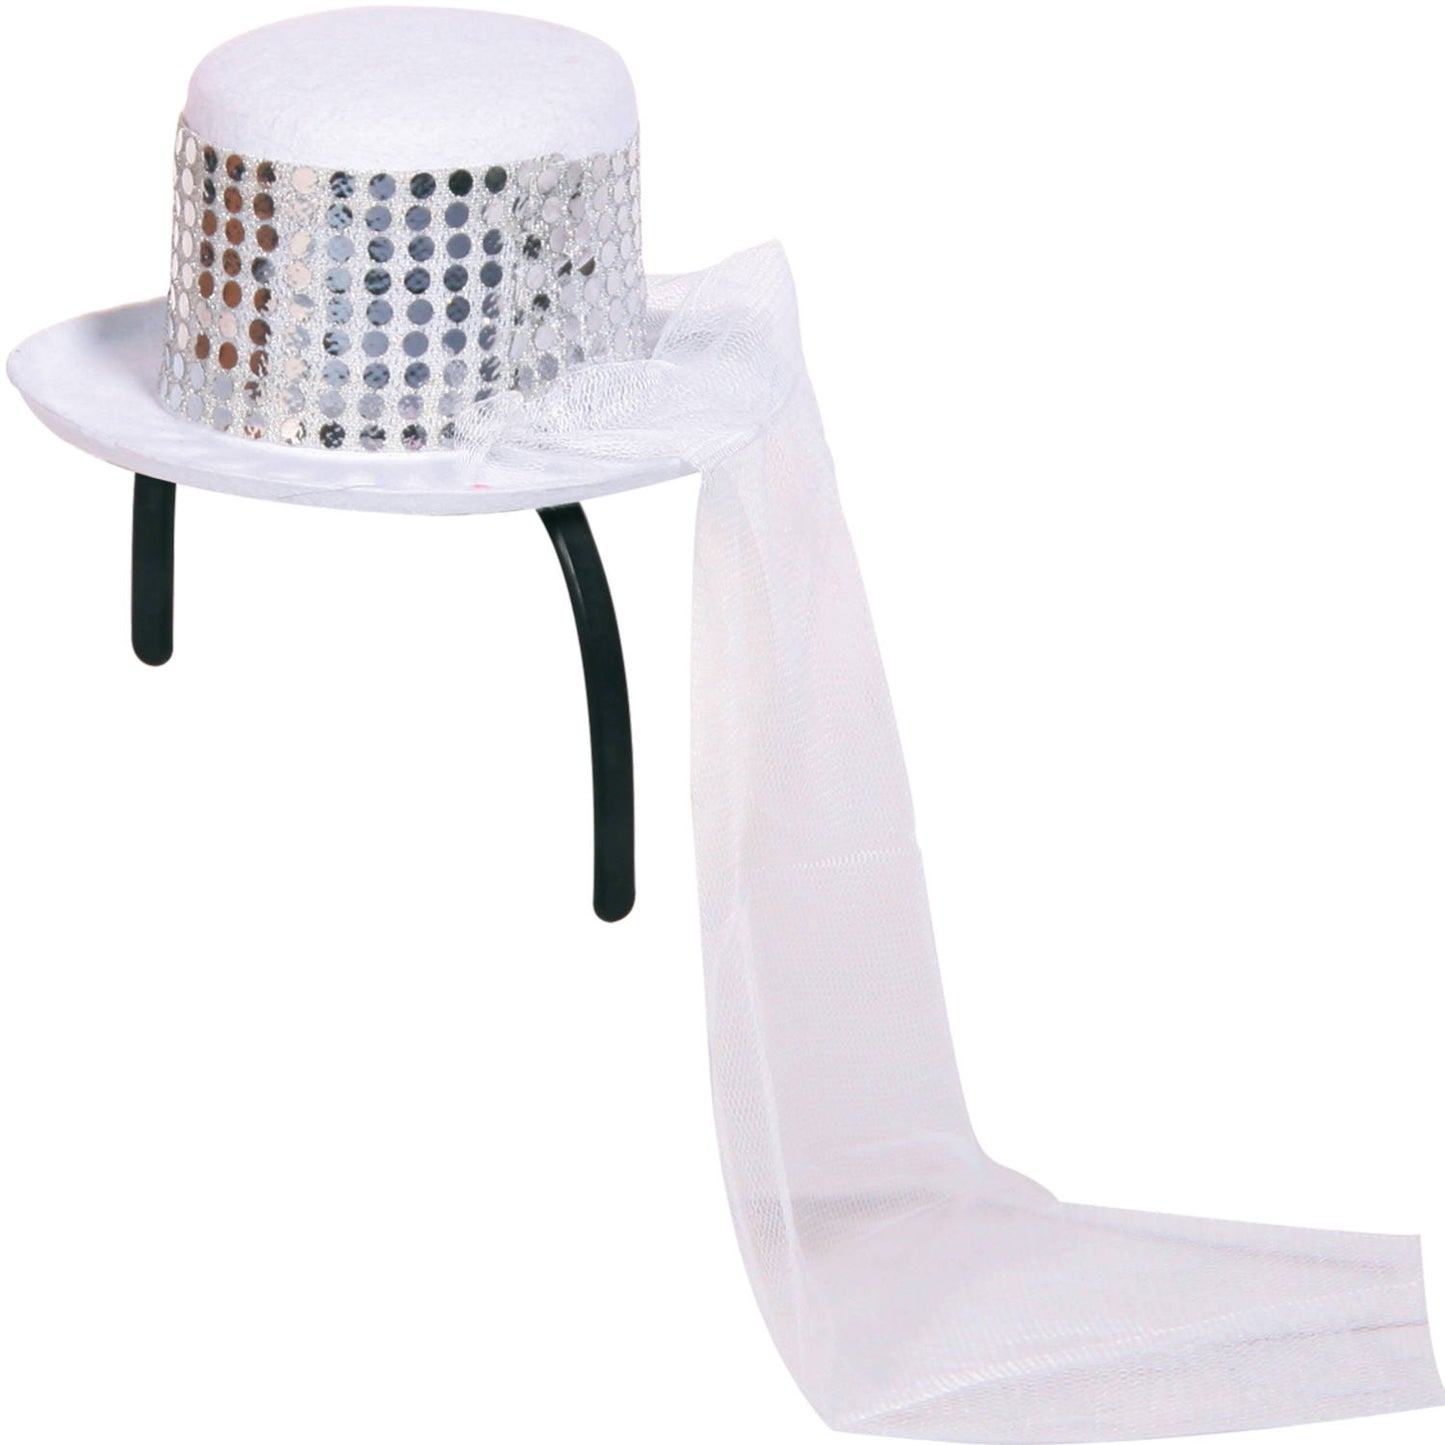 Wedding Hat with Veil - Complete your Bachelor Party!